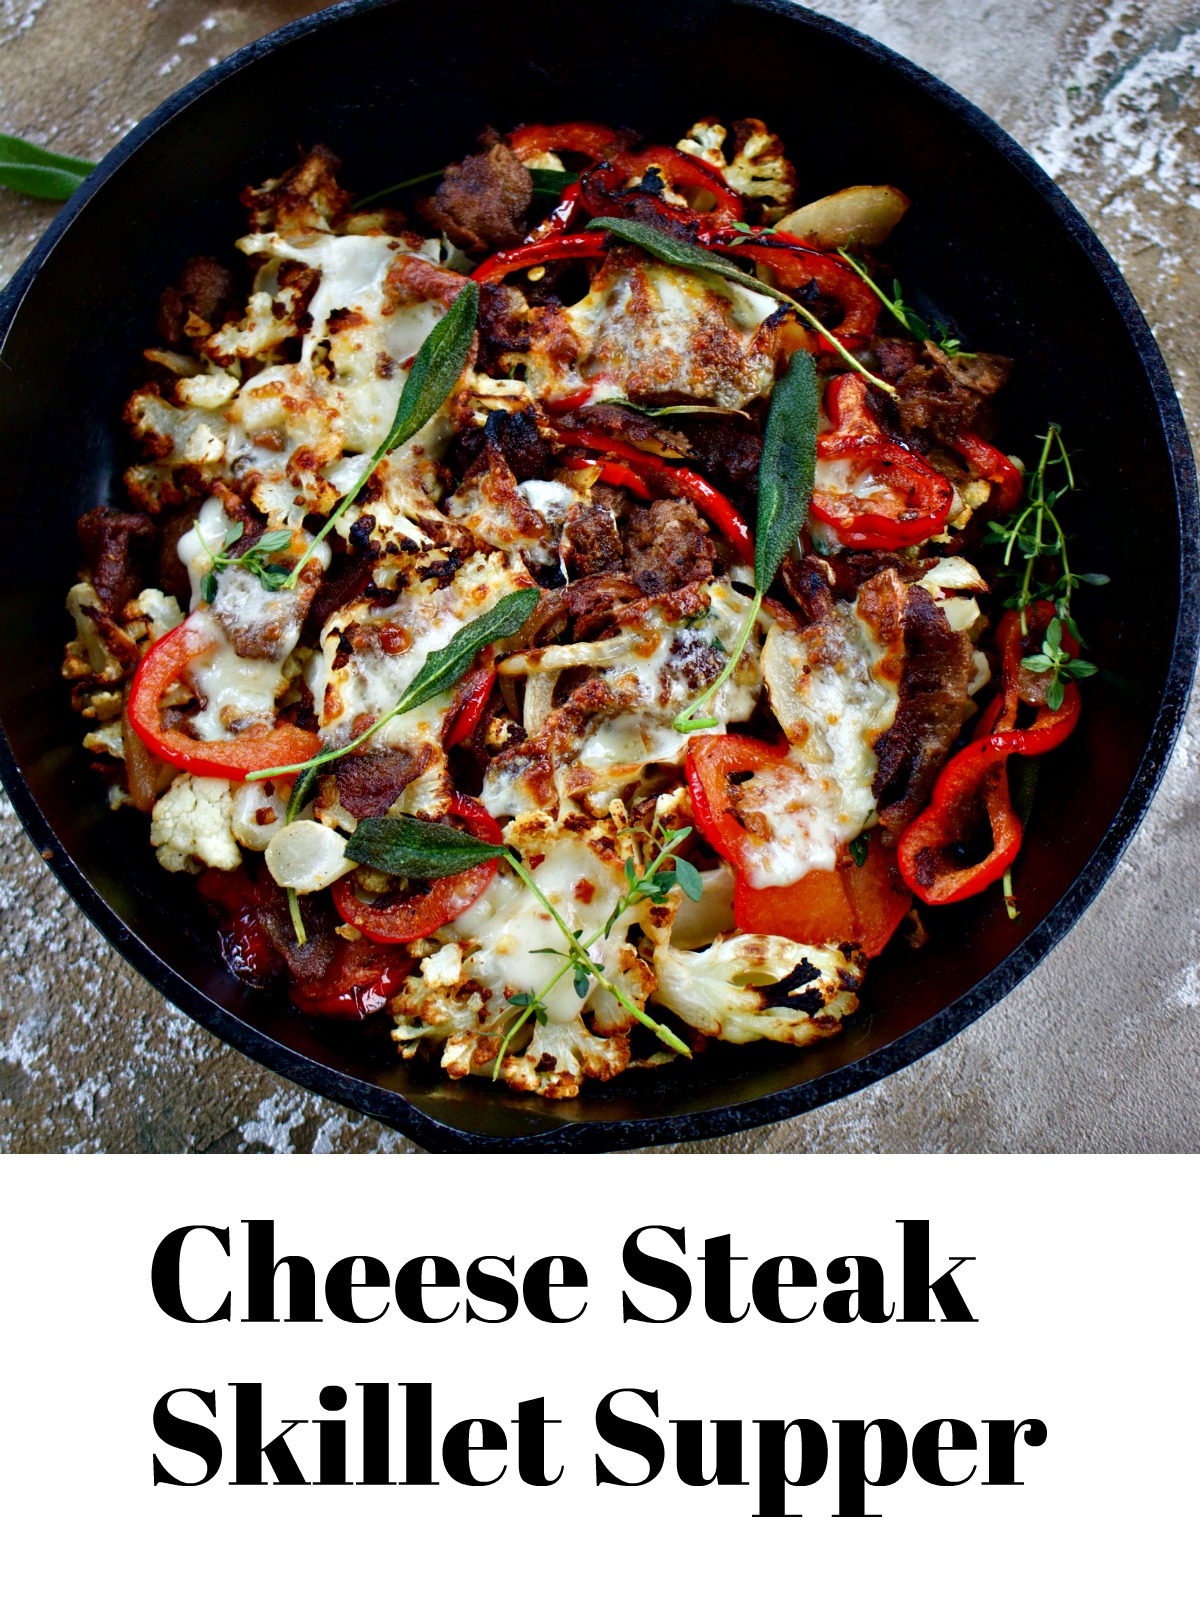 Cheese Steak Skillet Supper from Spinach Tiger